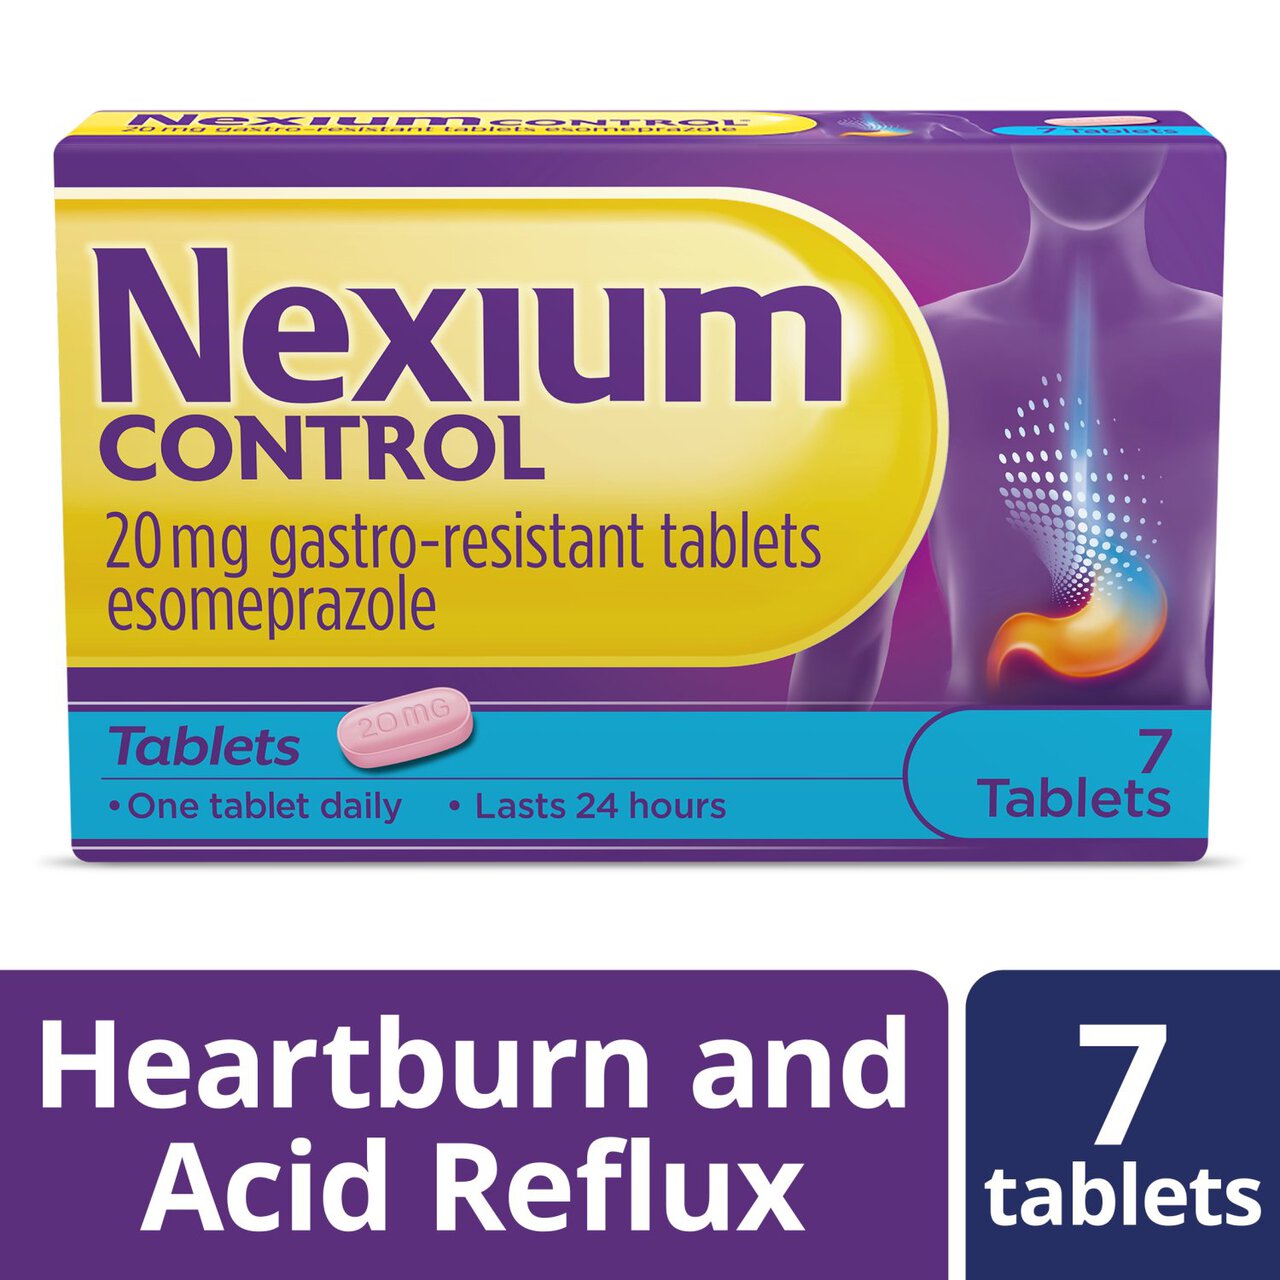 Nexium Control Heartburn and Acid Reflux Relief Tablets 7 per pack